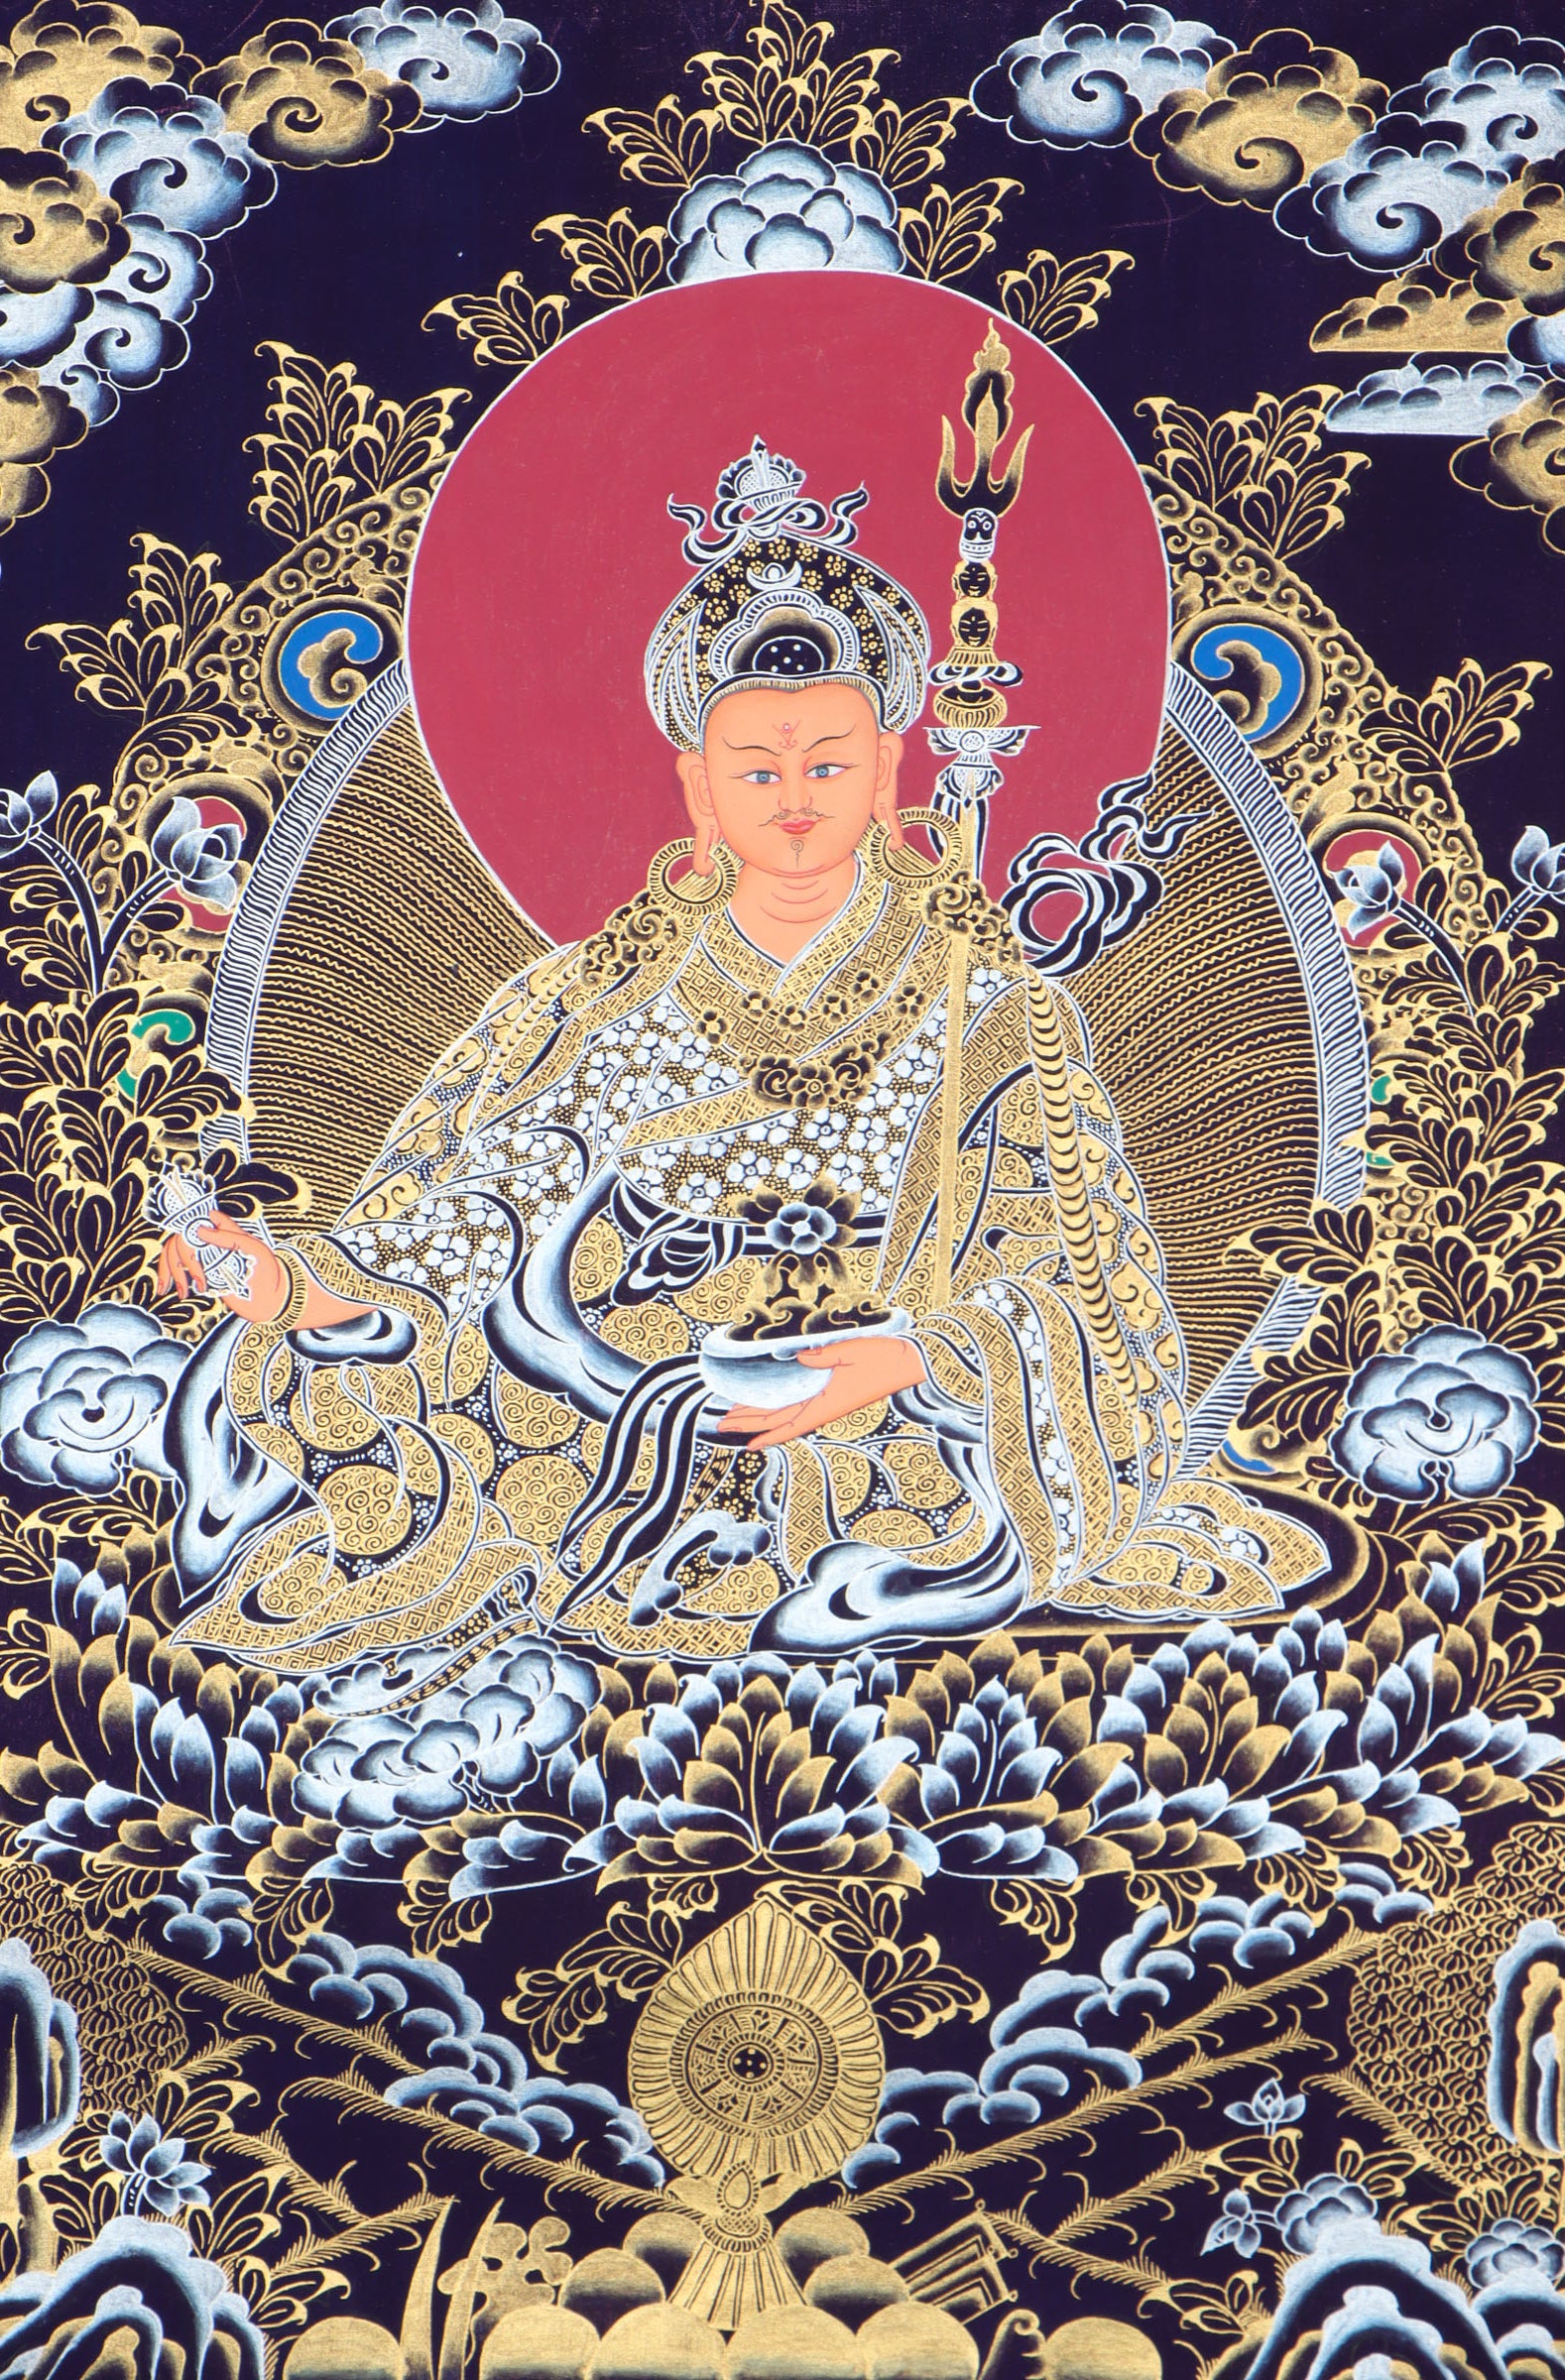 Guru Rinpoche Thangka for various features of his enlightened practices and lessons.